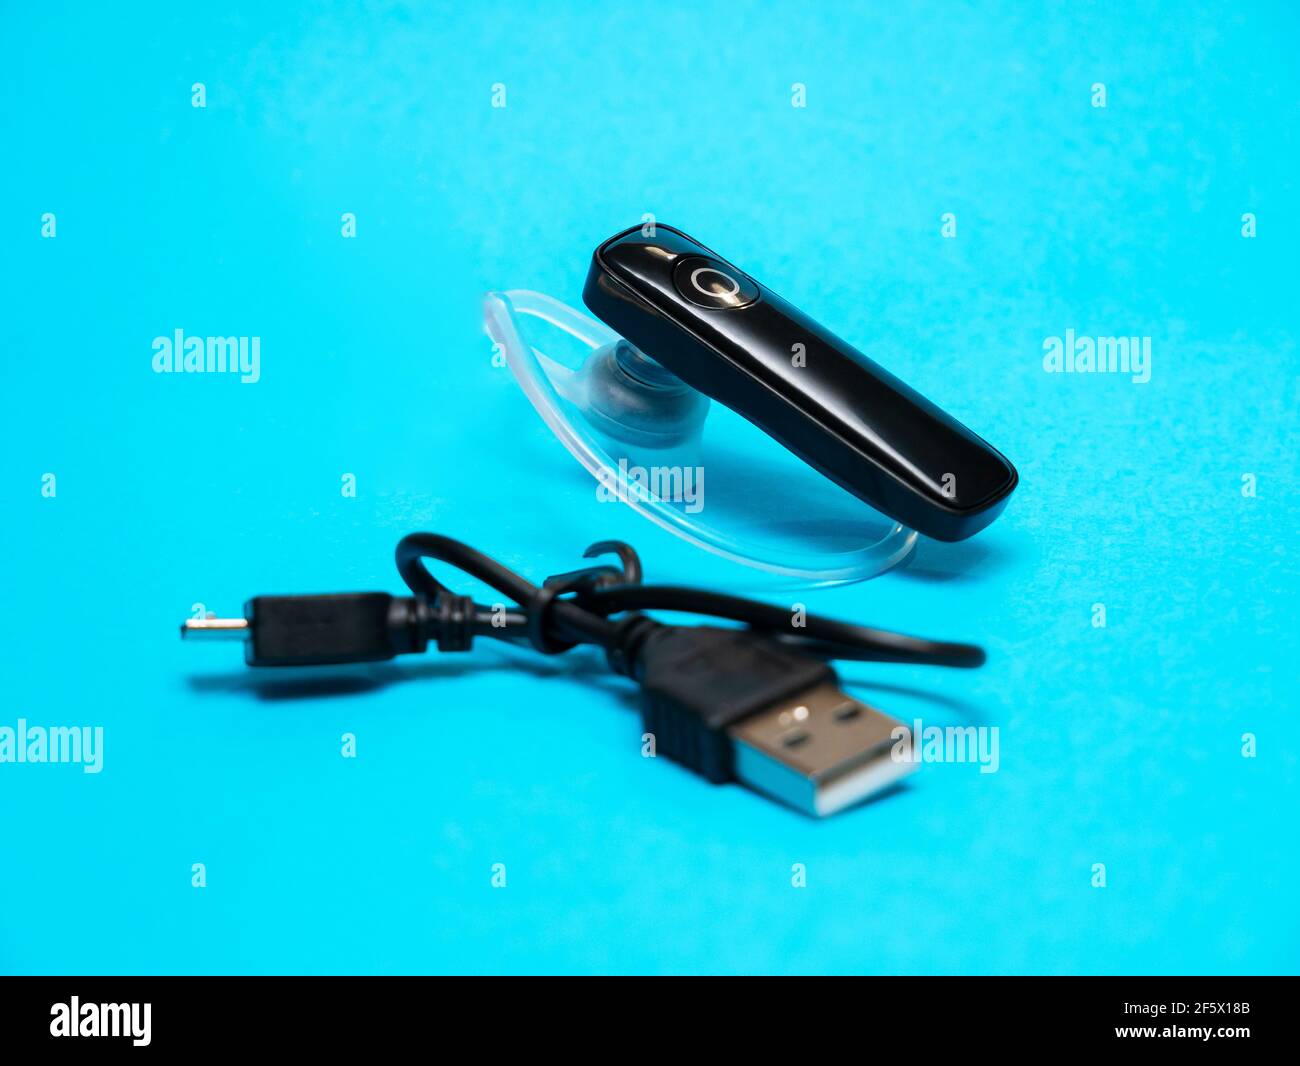 Simple hands-free wireless earpiece with a usb charging cable, object on a blue background, closeup, studio shot. Ergonomic mono handsfree headset wit Stock Photo